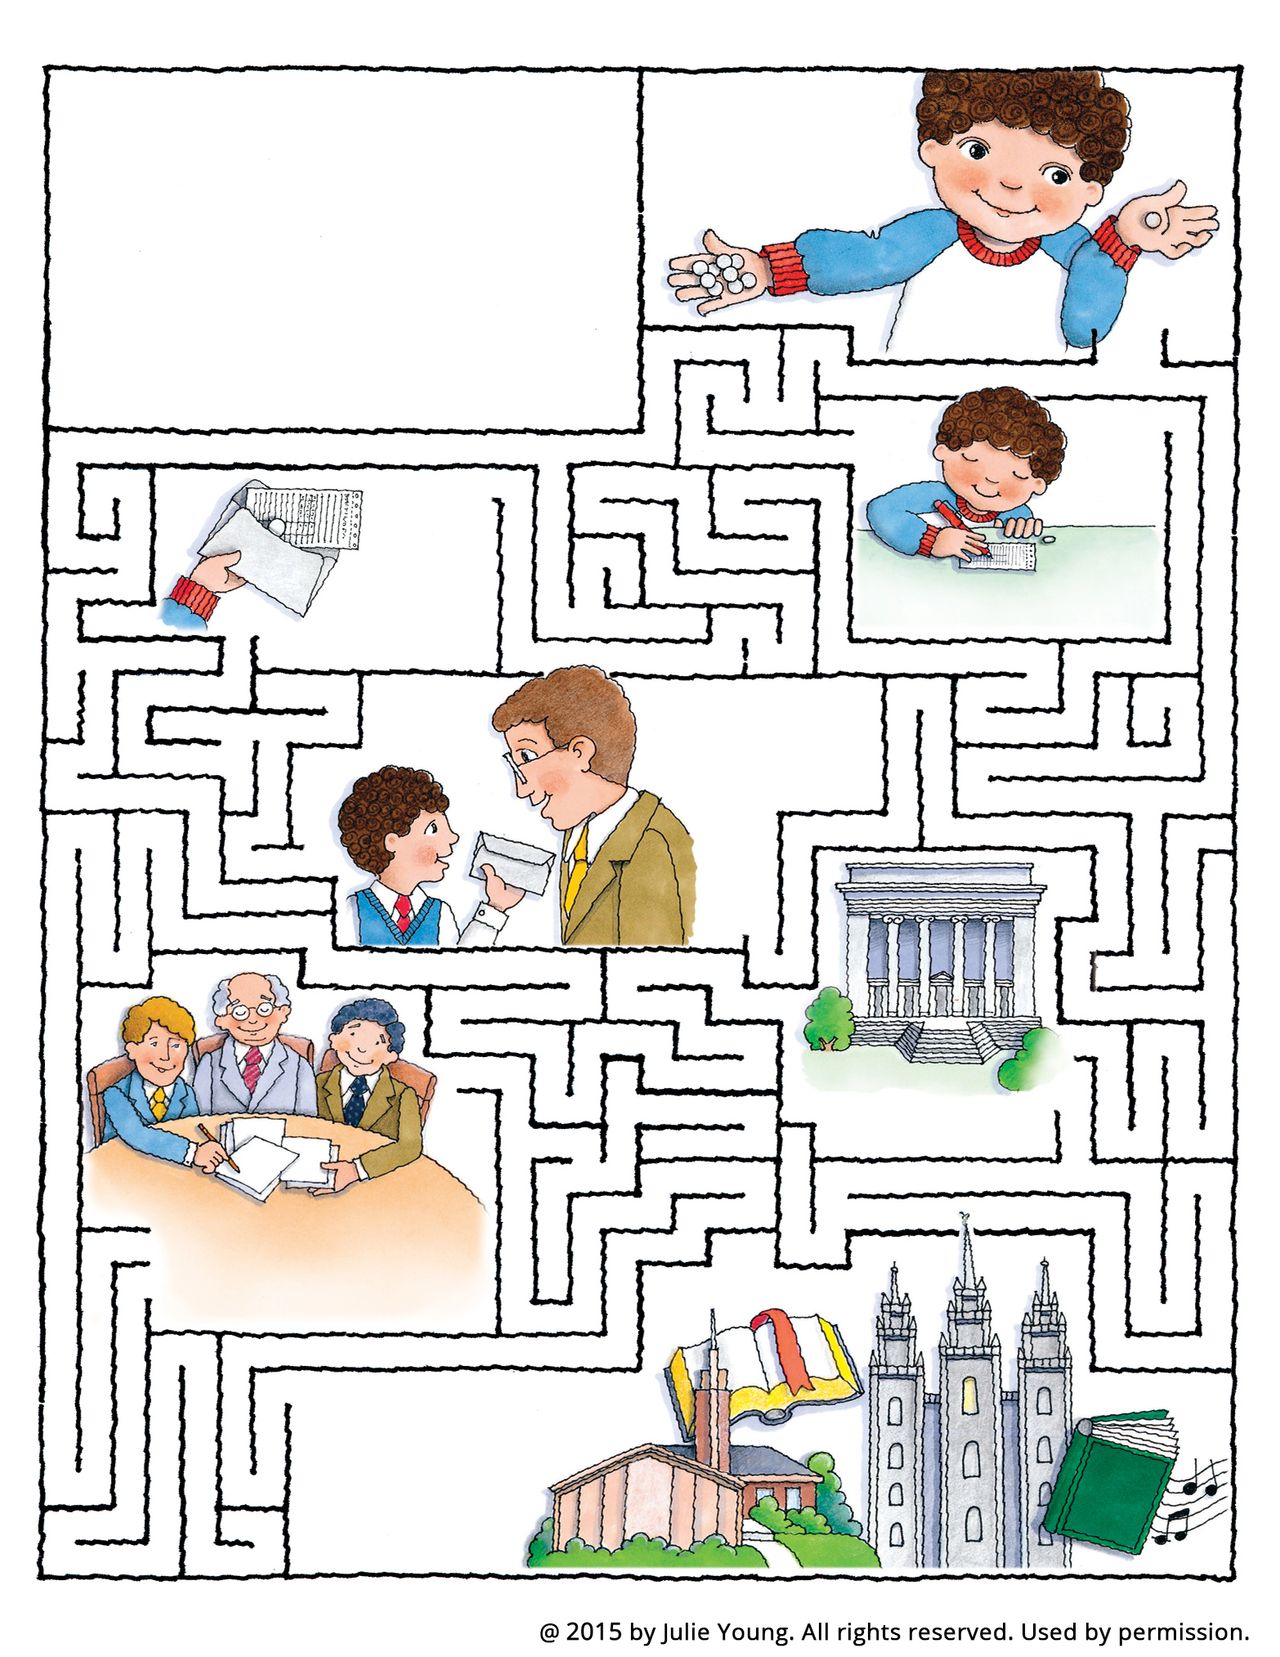 A maze with a young boy filling out tithing, which leads to a church and temple.